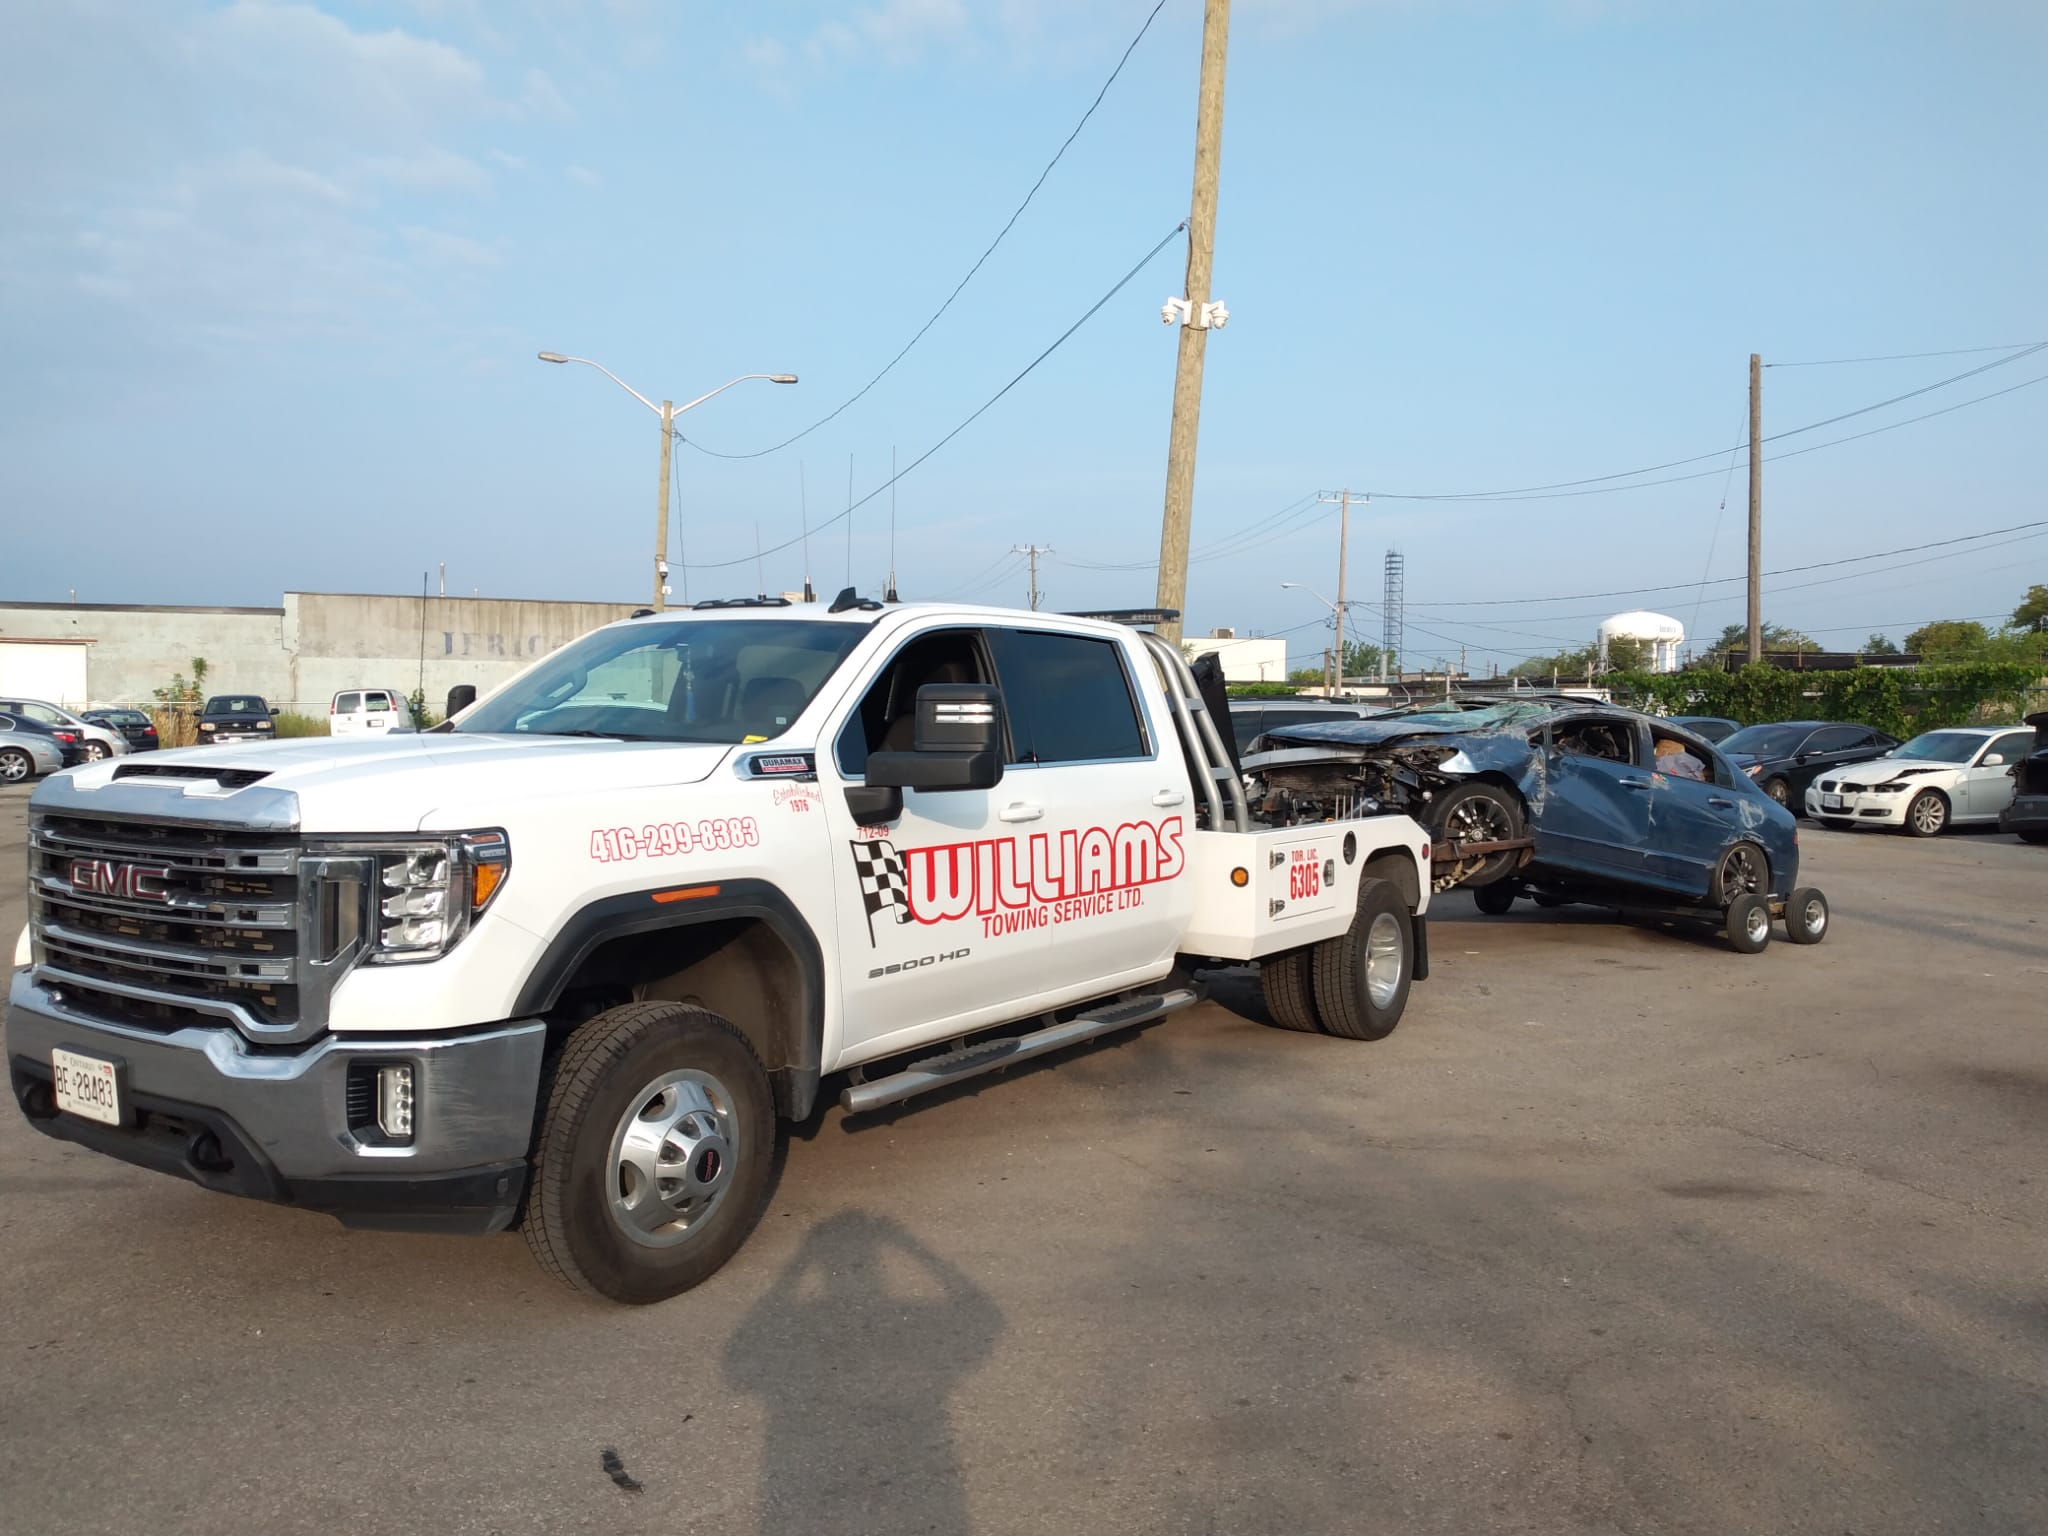 Williams Towing - 24/7 Etobicoke Towing | Fast & Reliable | Williams Towing